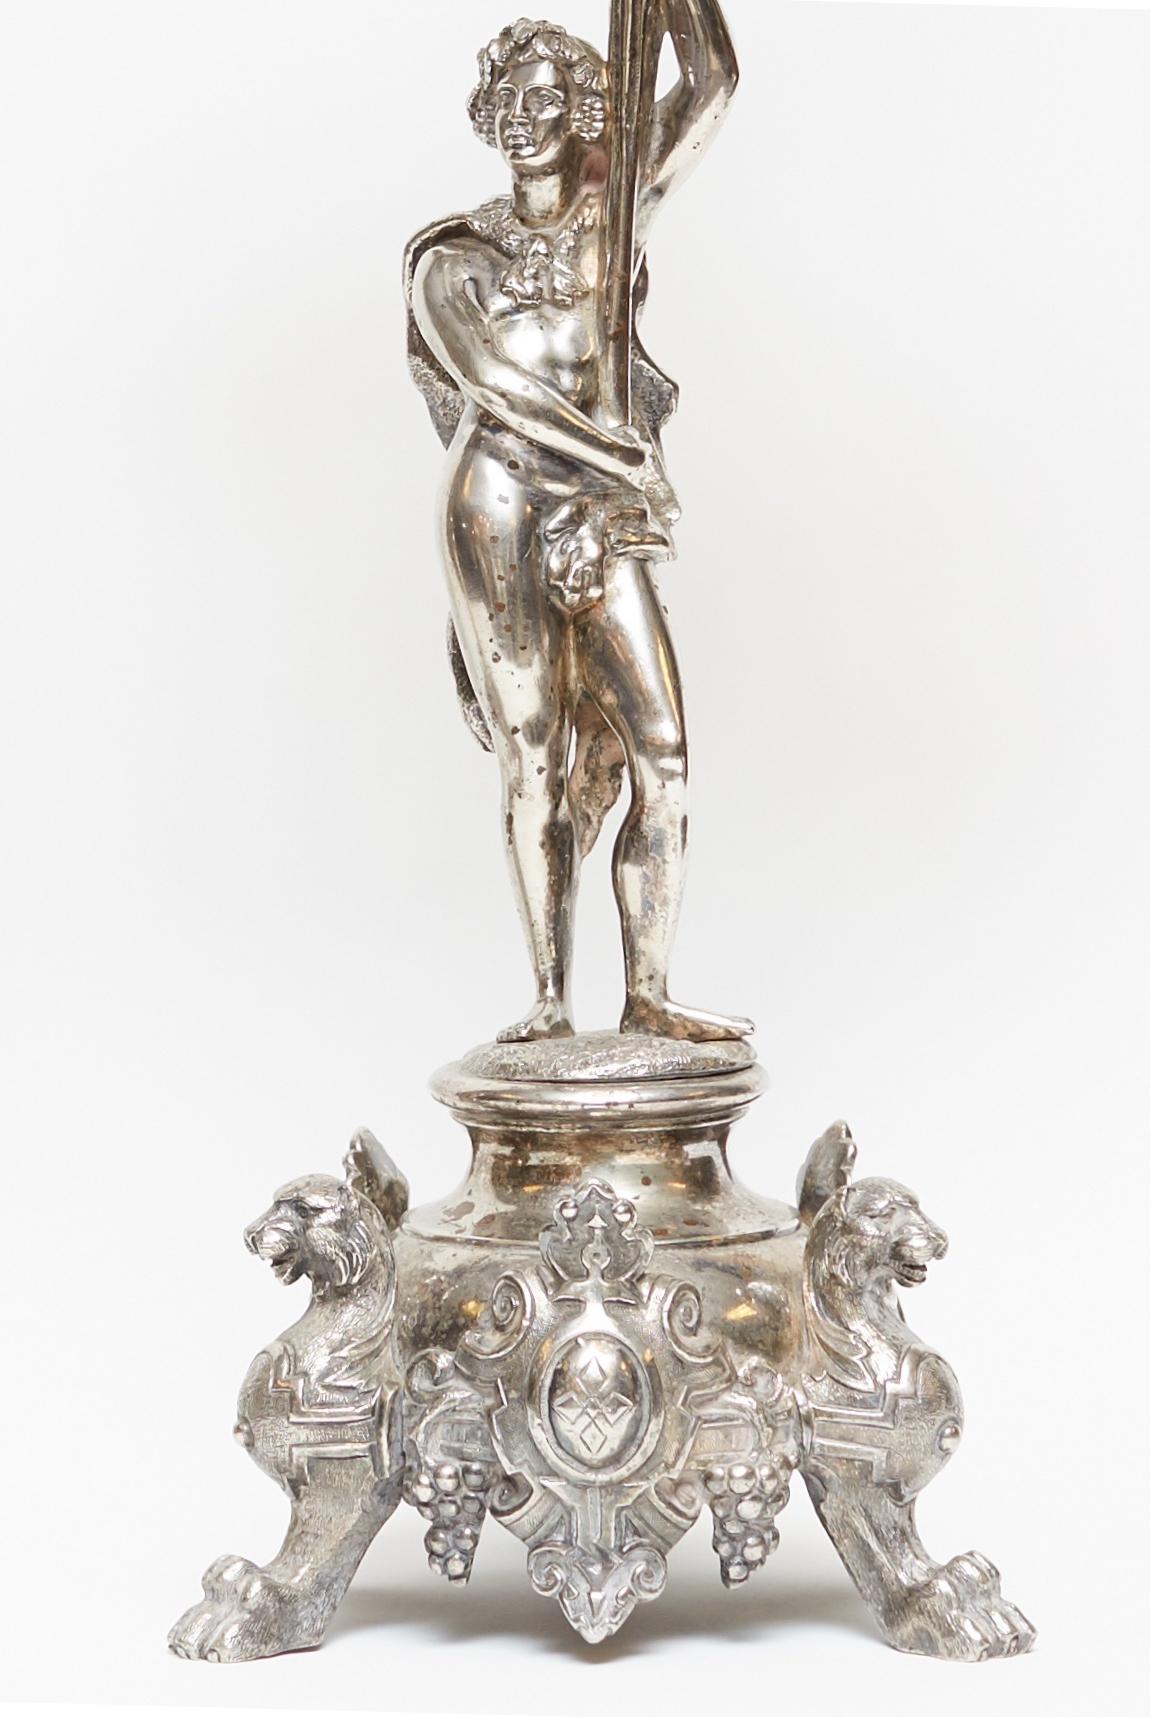 Pair of French 19th century silvered bronze candelabras with neoclassical figures holding foliate style branch of candle arms, standing on three-legged pedestals with griffins and shields.